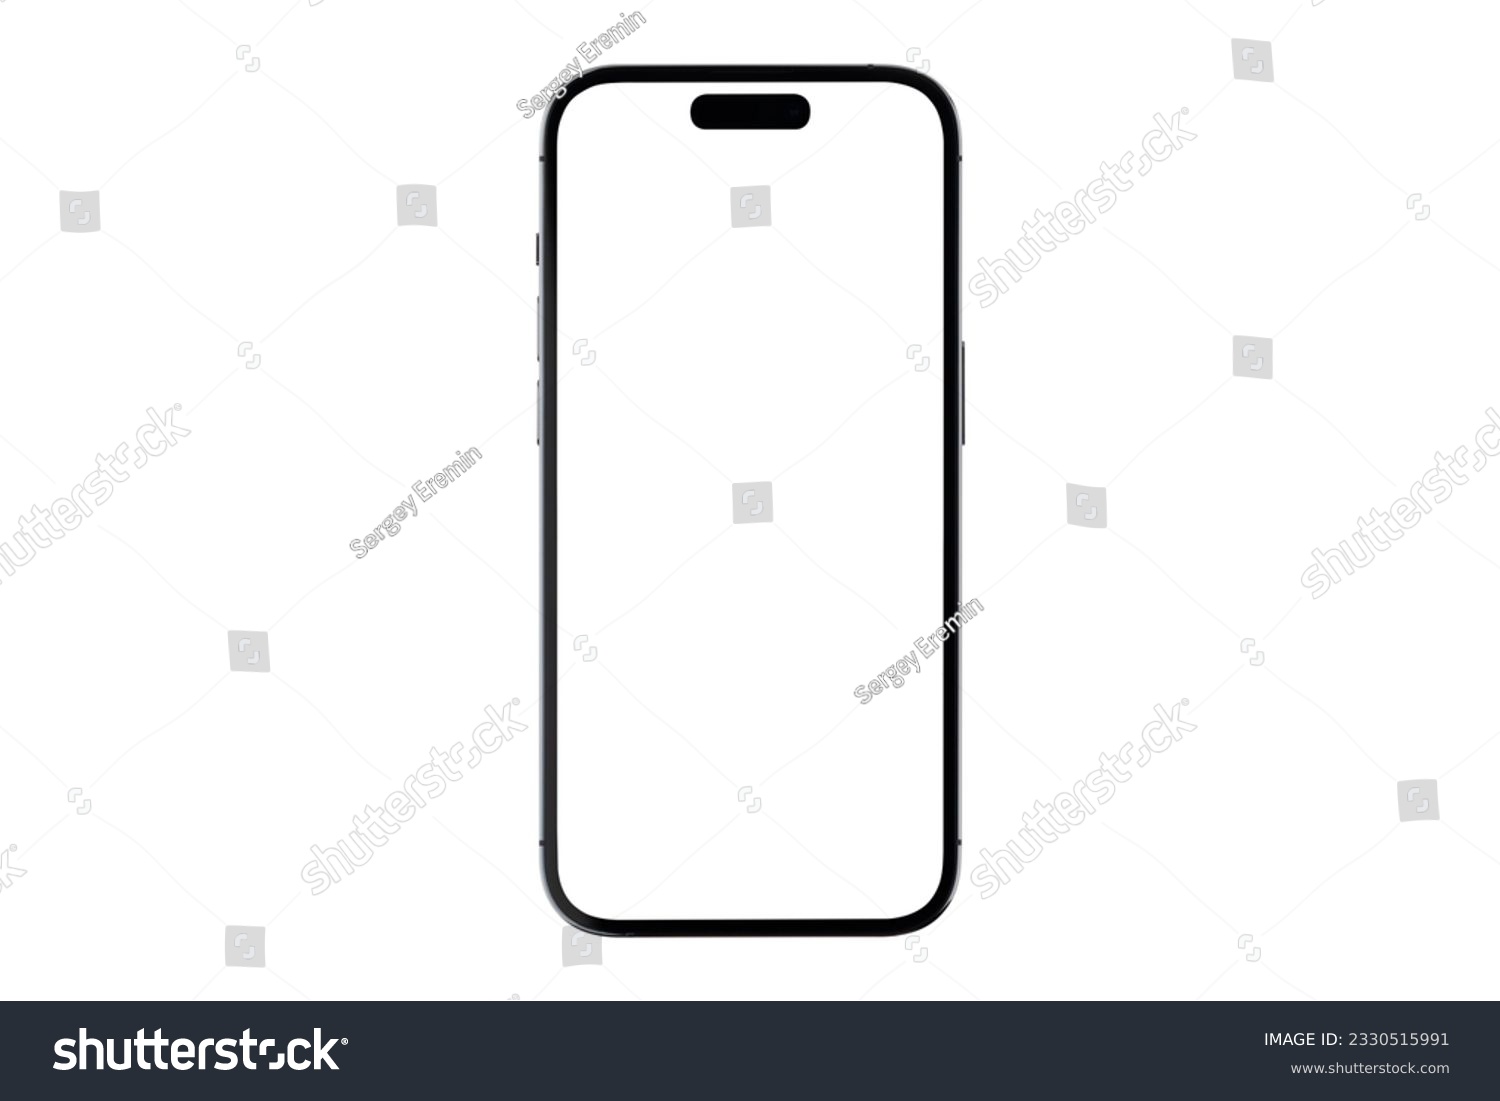 Smartphone with a blank screen on a white background. Smartphone mockup closeup isolated on white background. #2330515991